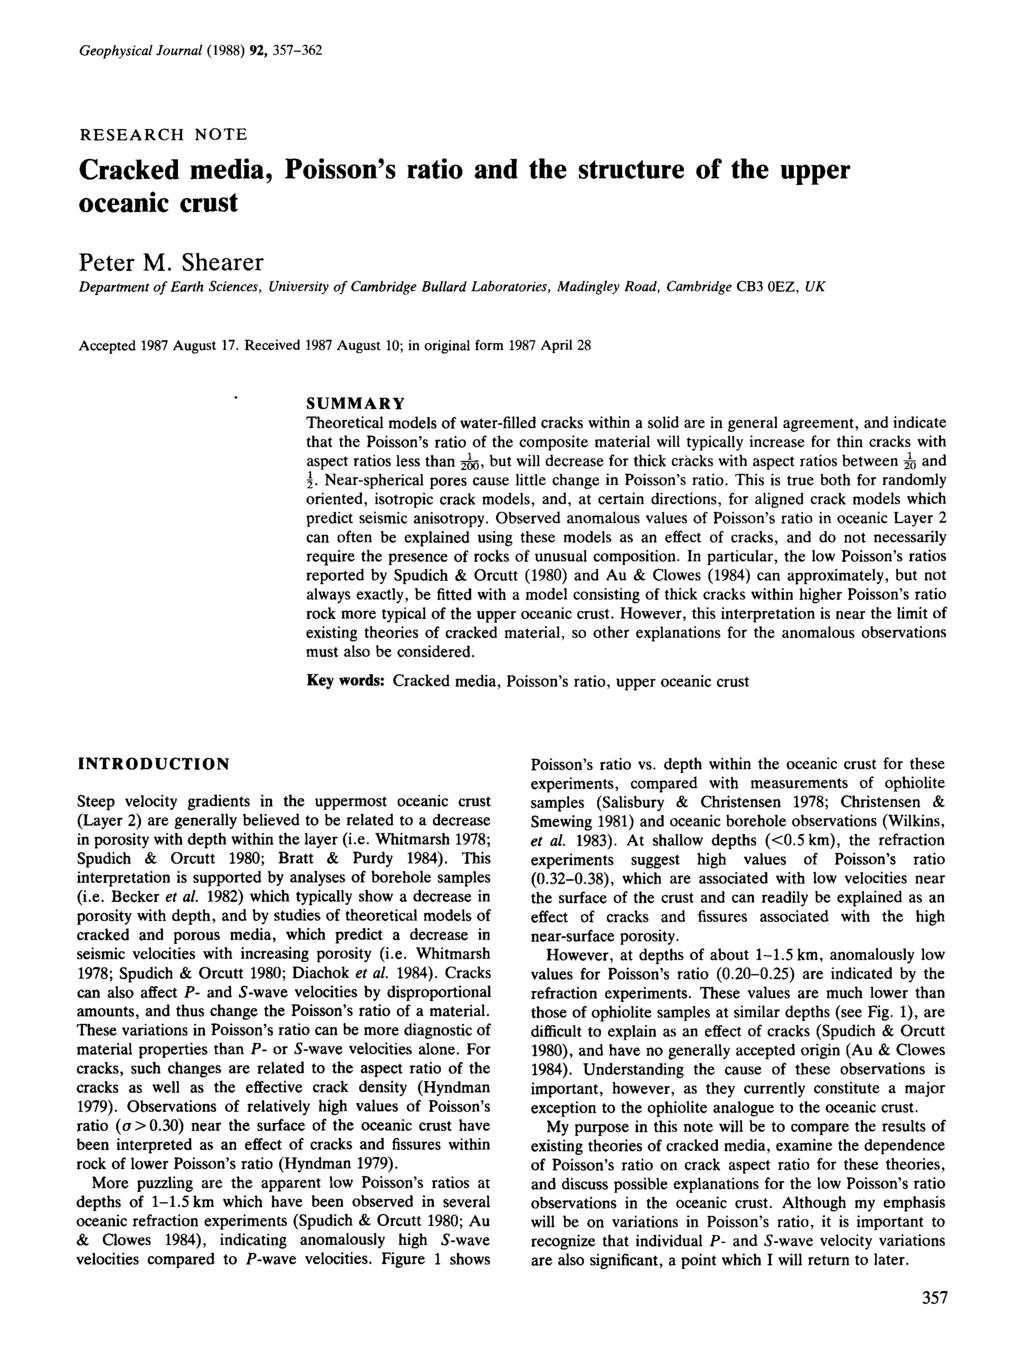 Geophysical Journal (1988) 92, 357-362 RESEARCH NOTE Cracked media, Poisson s ratio and the structure of the upper oceanic crust Peter M.